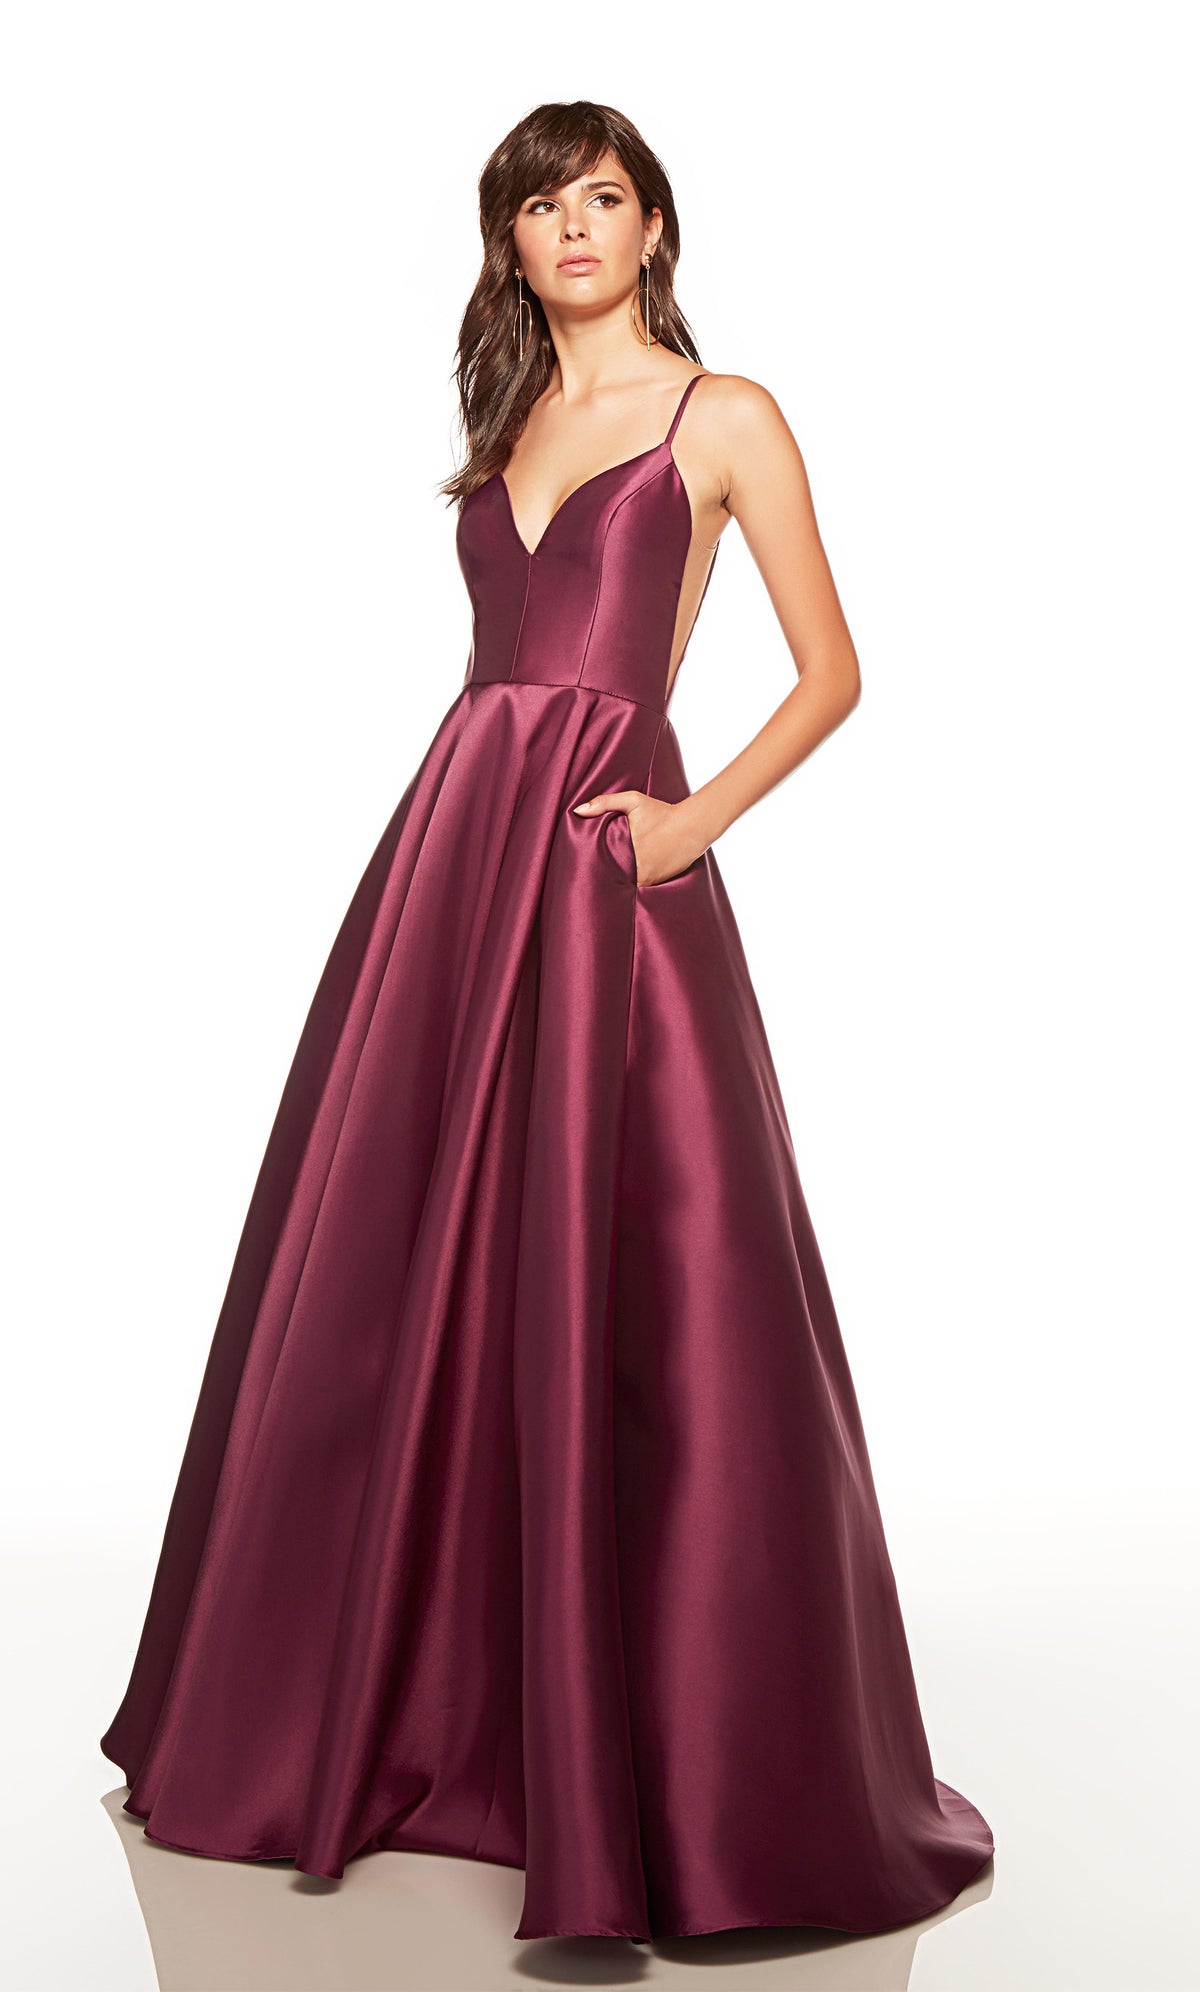 Sweetheart ballgown prom dress with pockets in the color black plum. COLOR-SWATCH_1753__BLACK-PLUM